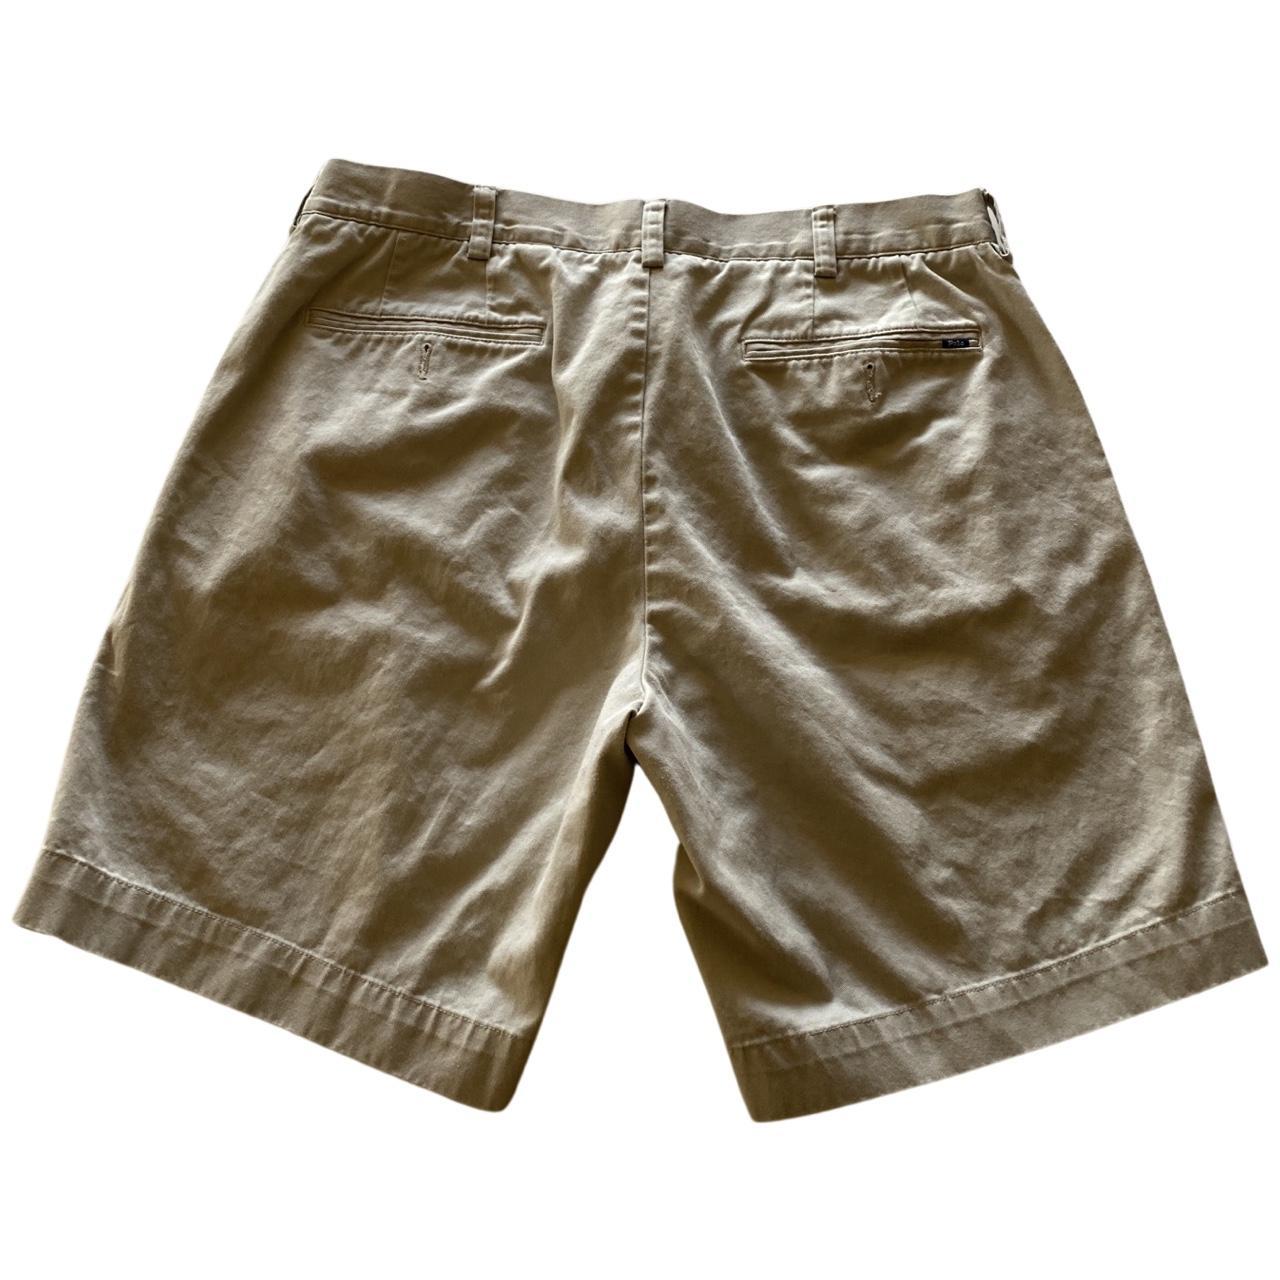 Product Image 2 - These are a pair of